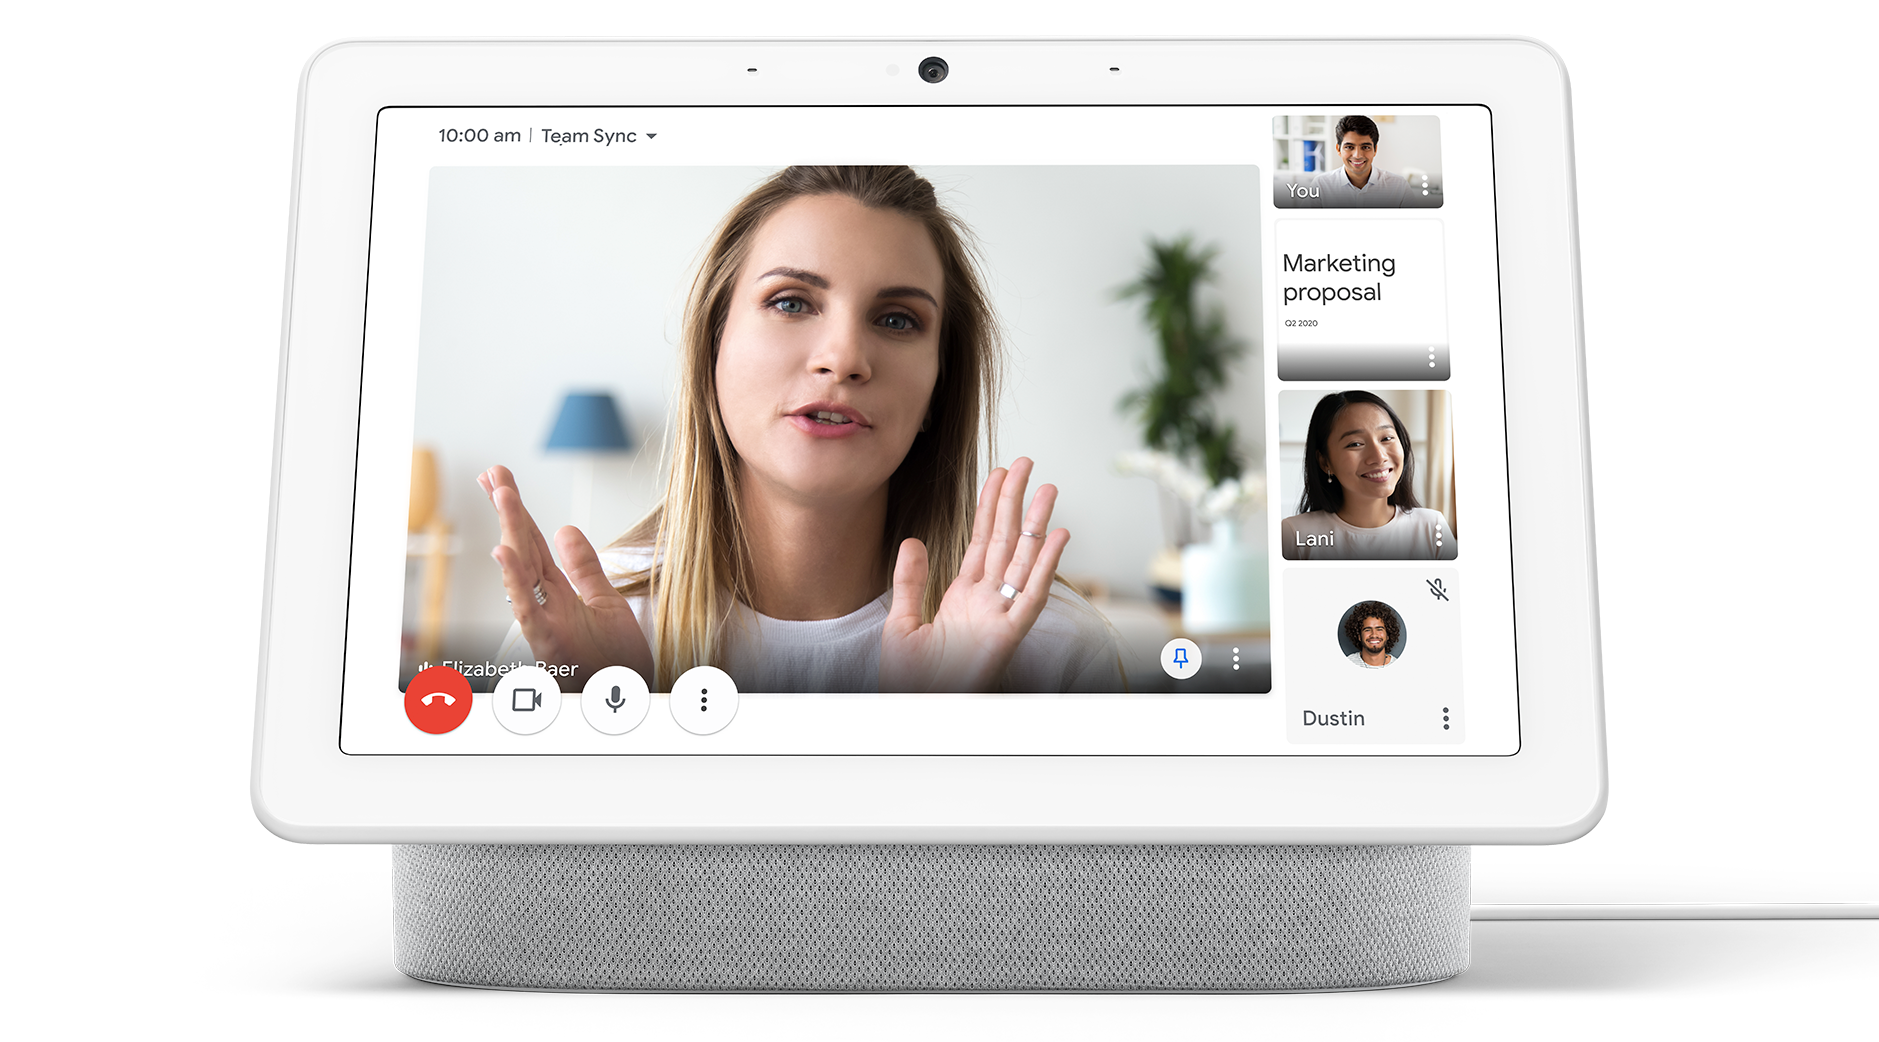 Google Workspace Updates Improved Google Meet Experience On The Nest Hub Max